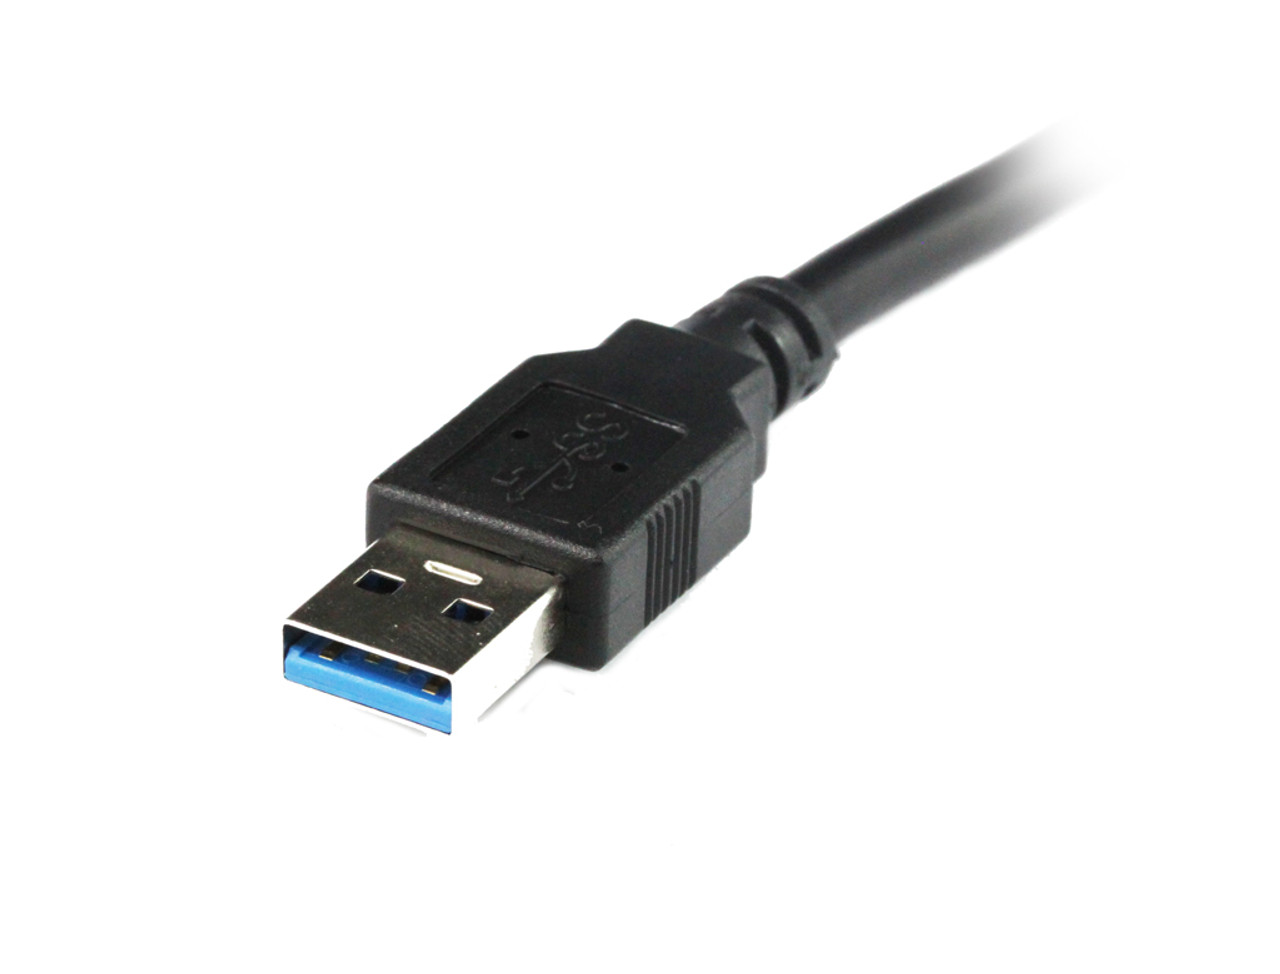 5M USB 3.0 AM/AM Cable in Black